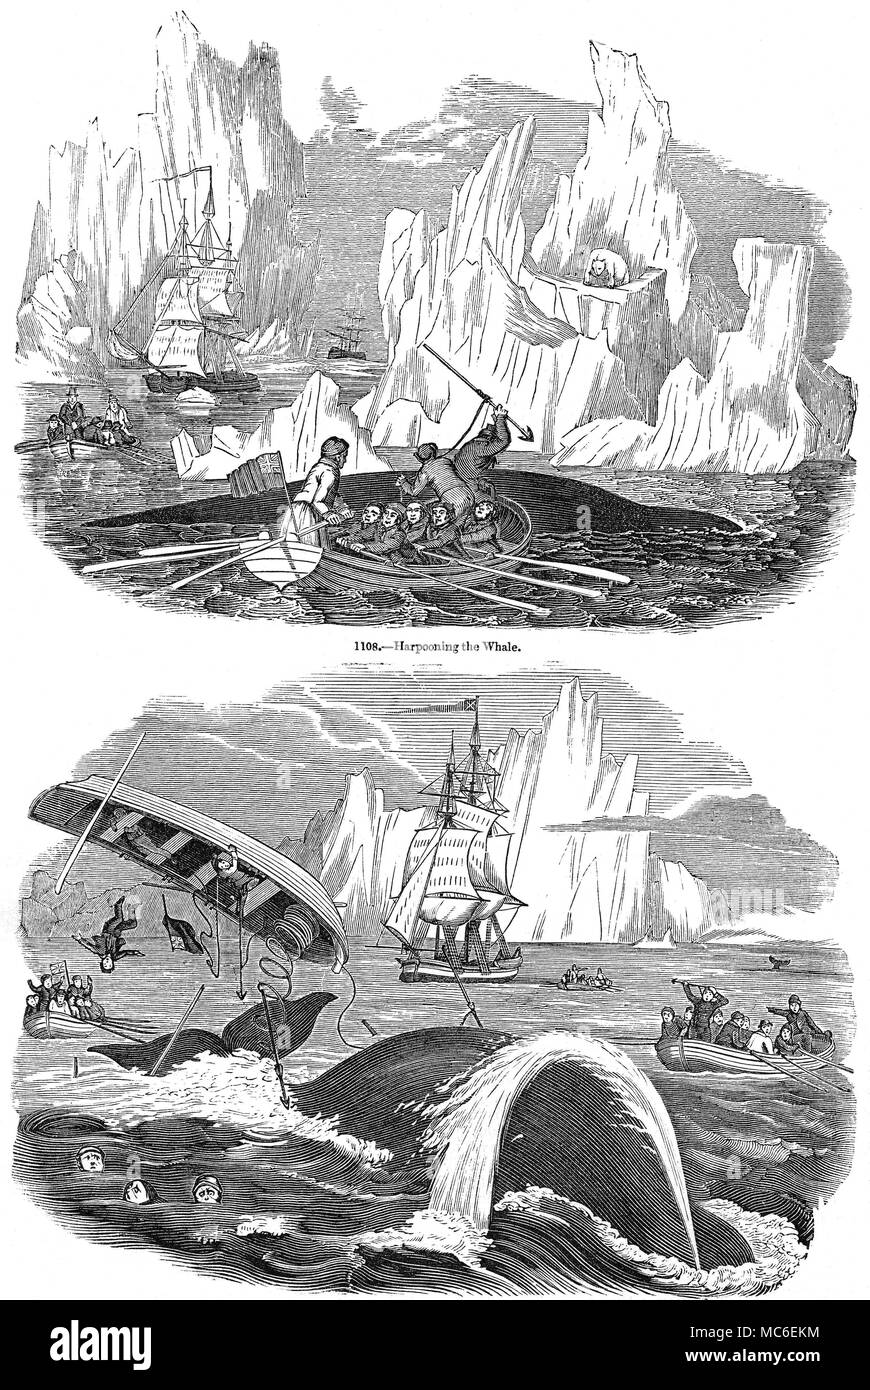 MONSTERS - WHALES Harpooning a Whale (top), and the consequences of getting too close to a whale. Engravings from The Museum of Animated-Nature, 1873. Stock Photo